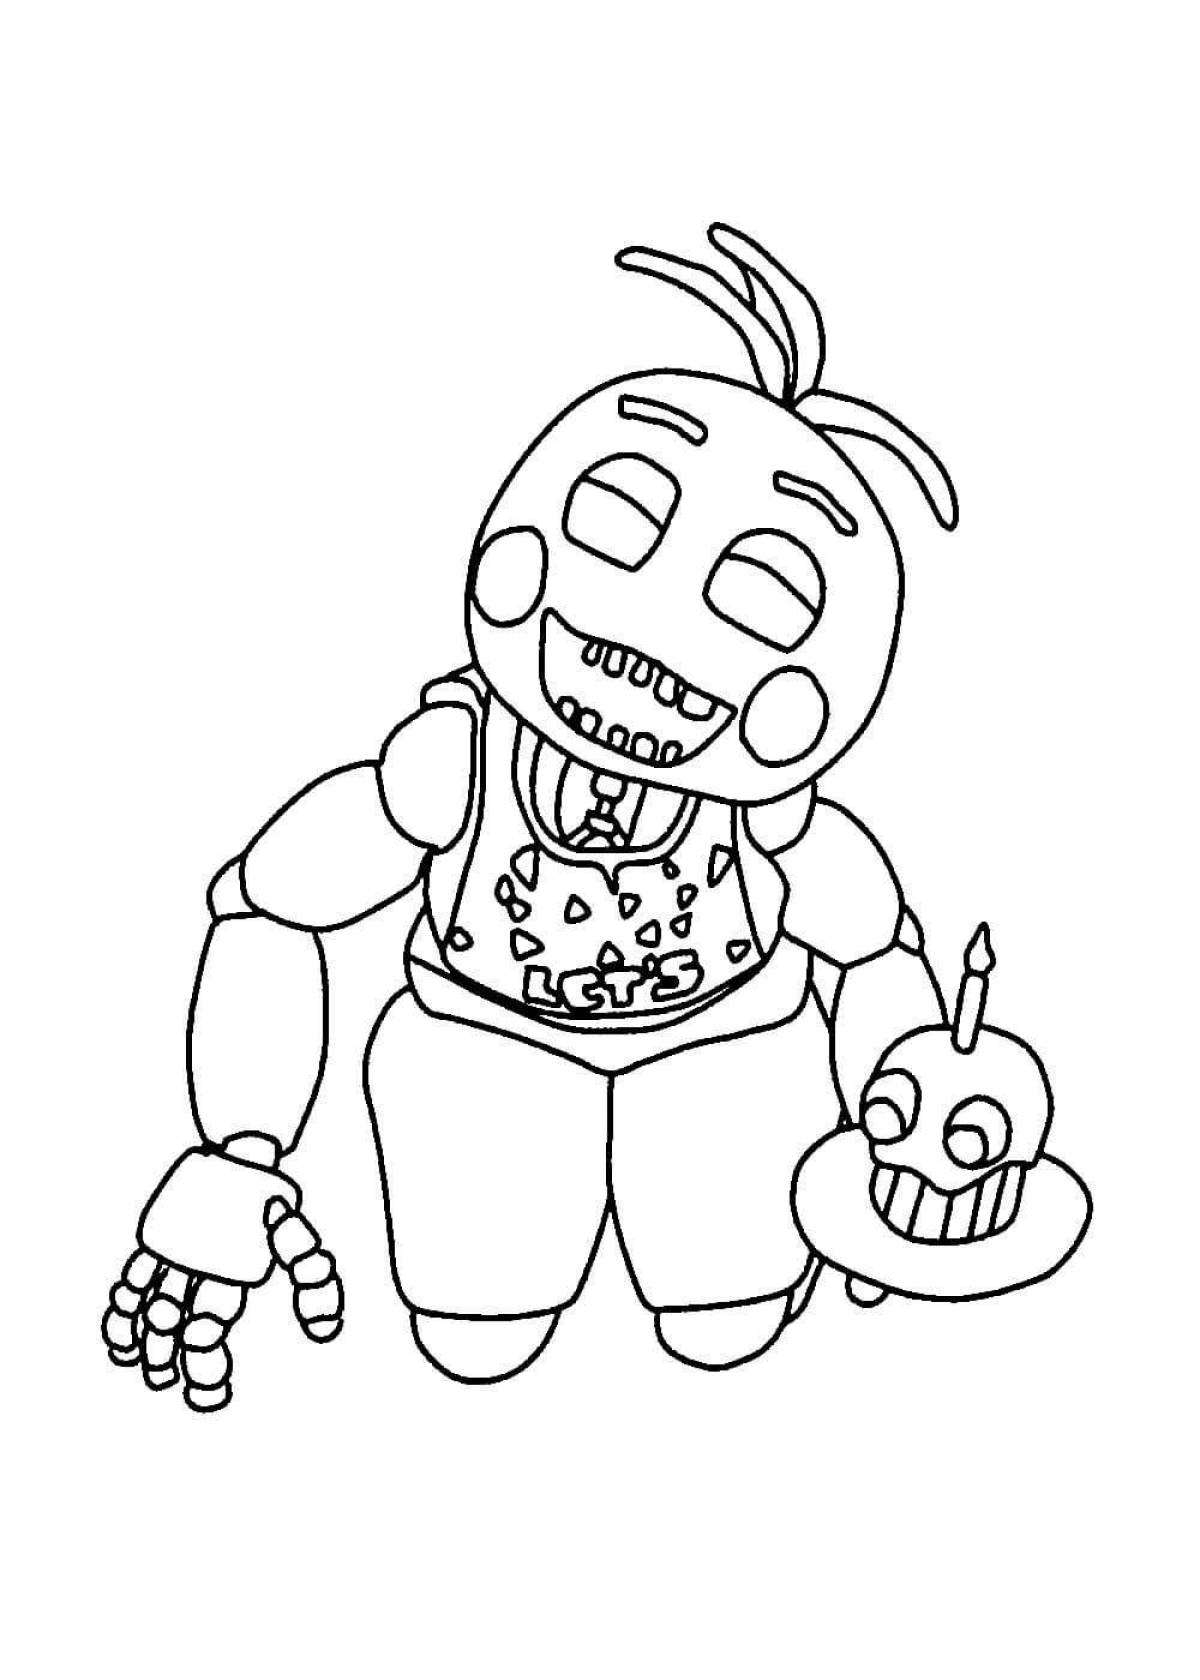 Coloring page extraordinary chica from fnaf 1